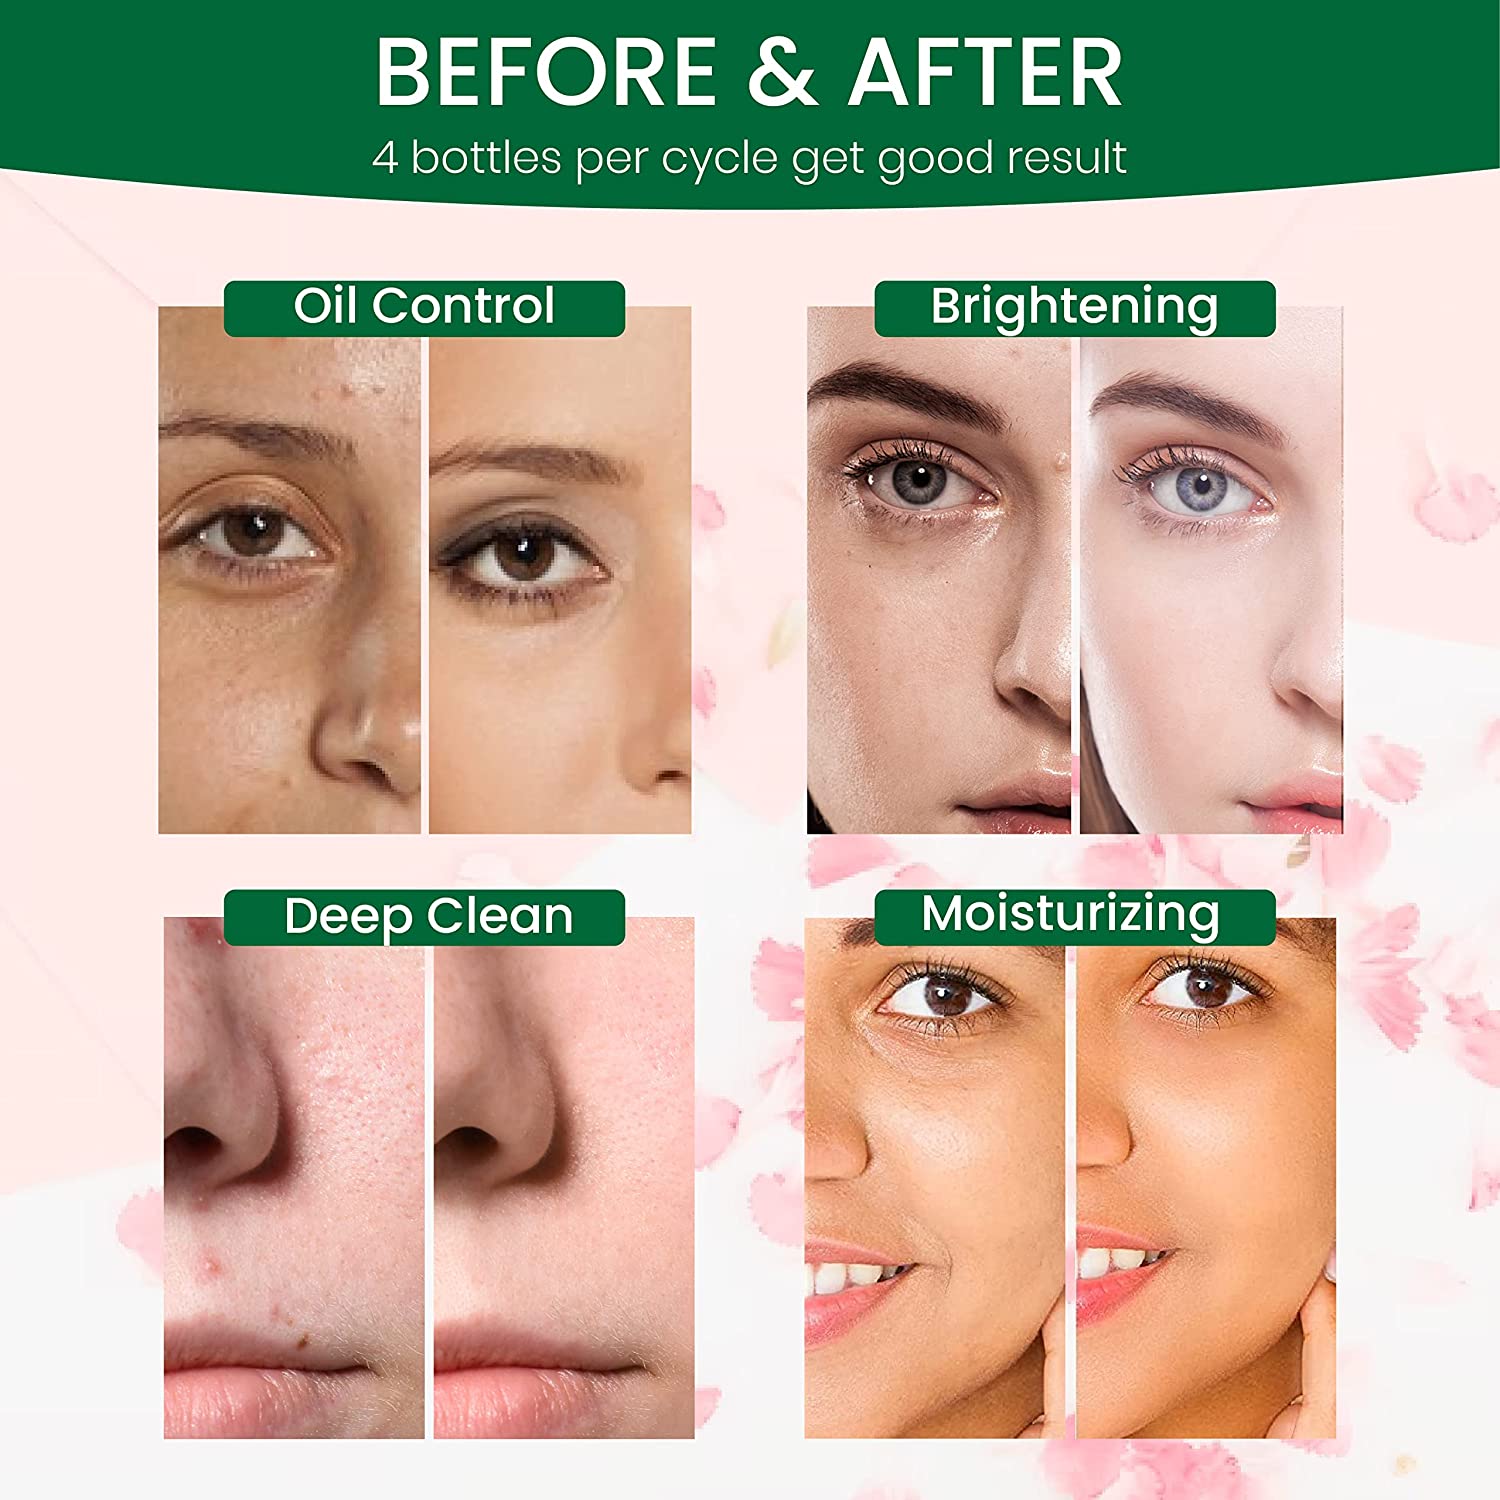 face skin status of before and after using green tea facial mask 80201500 from cuteage